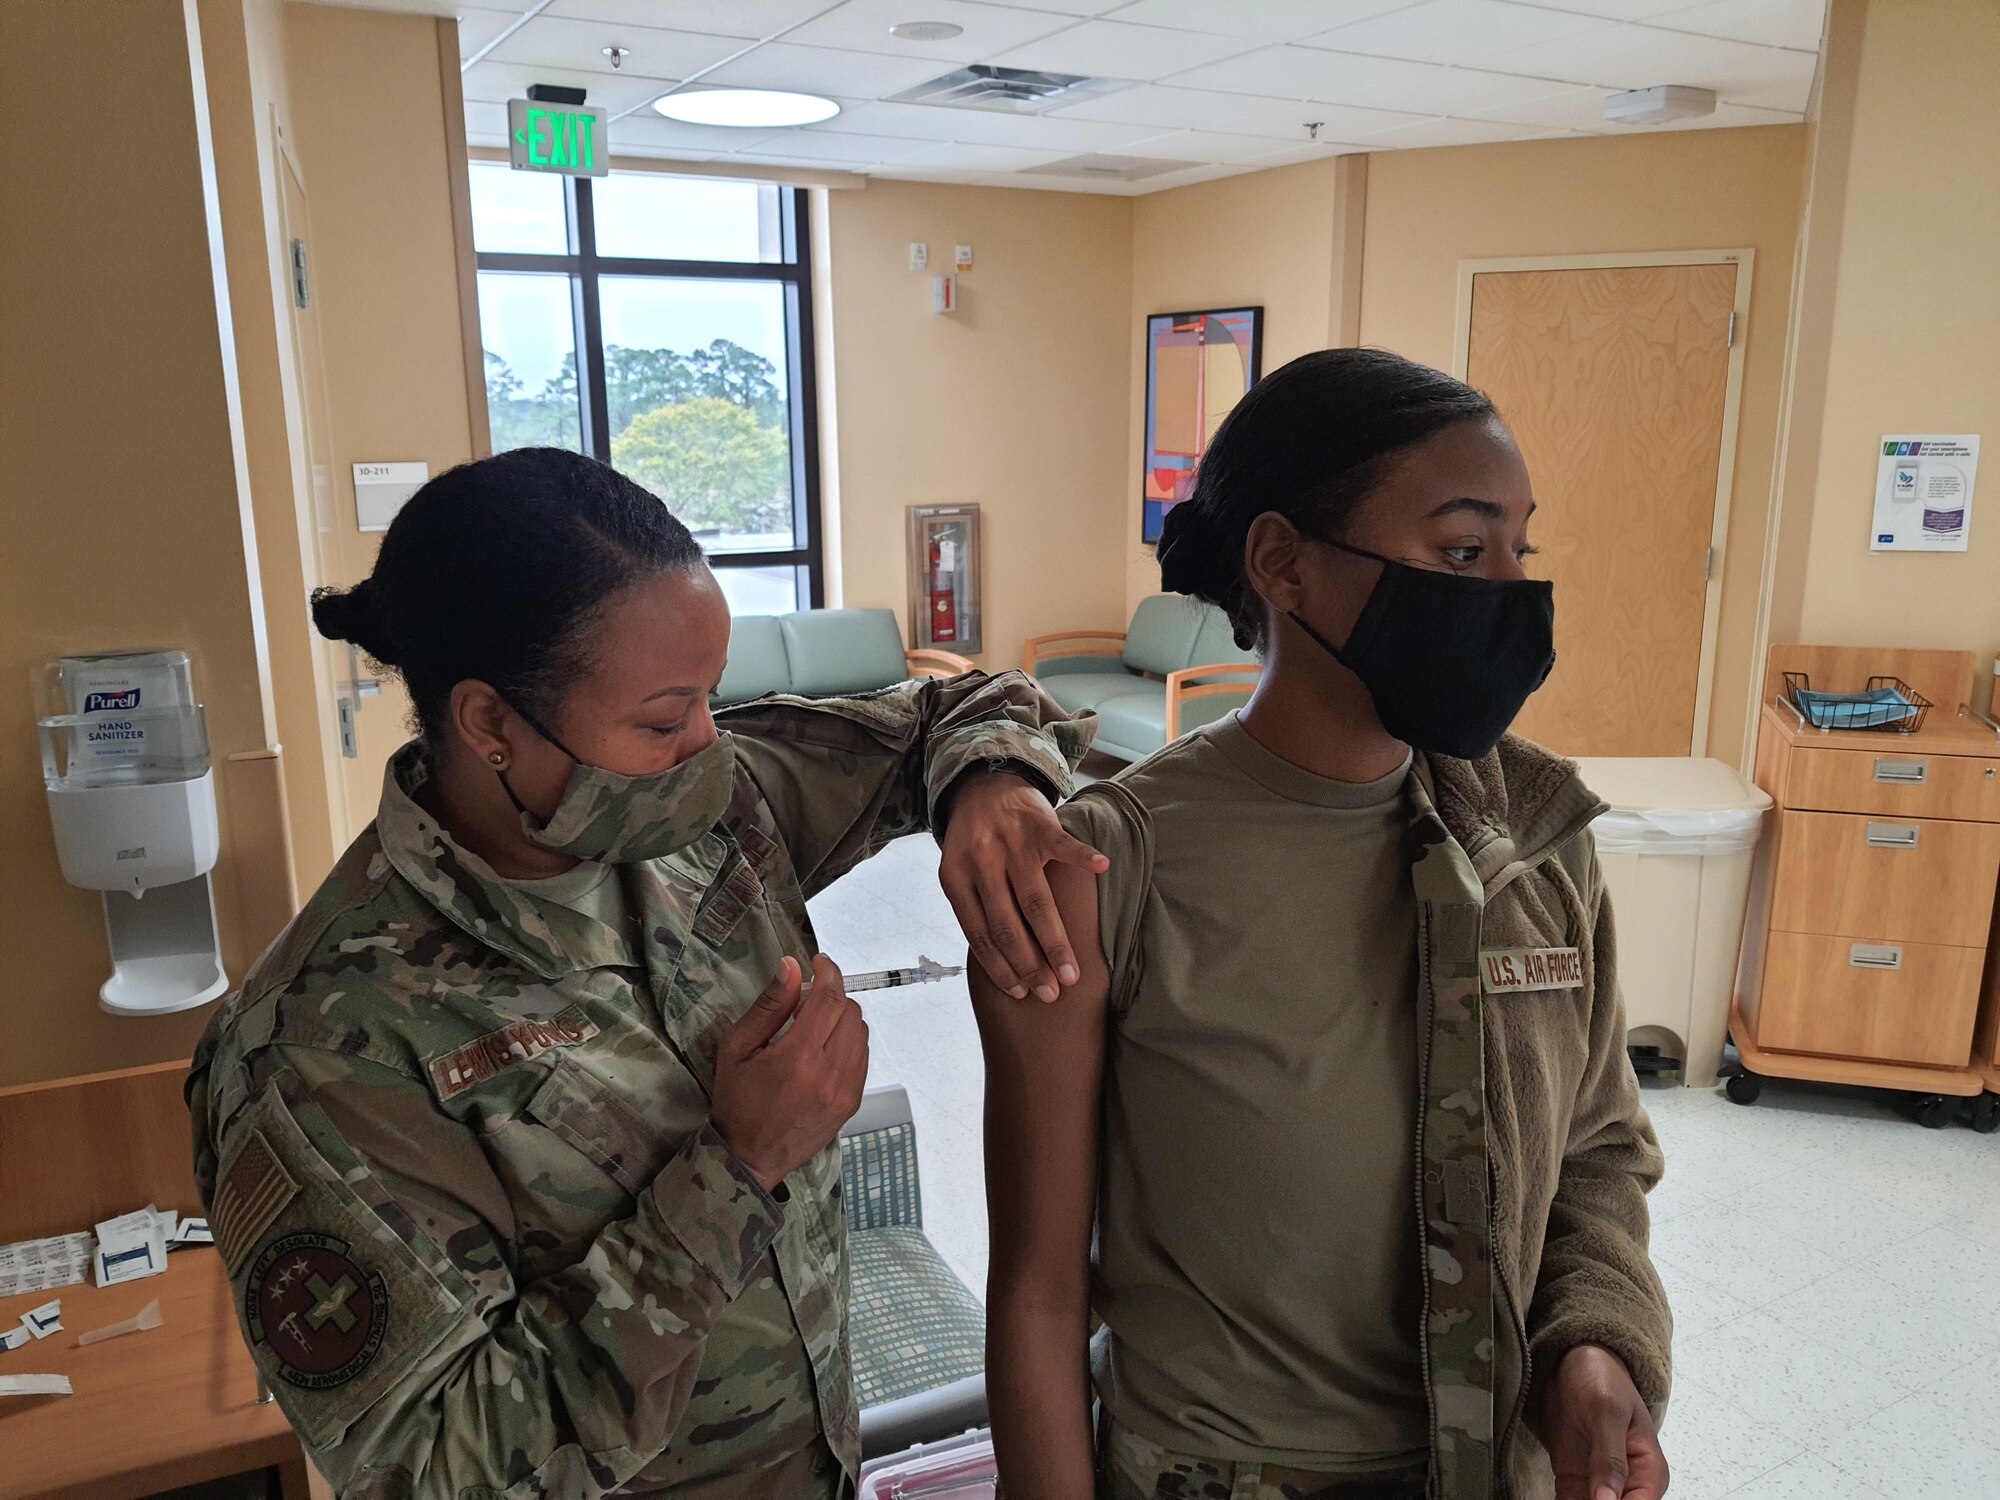 Maj. Angela Lewis-Young, 403rd Aeromedical Staging Squadron nurse, administers the first dose of the COVID vaccine to Senior Airman Rachel Smith, 403rd ASTS medical technician, Feb. 6, 2021. These were literal firsts for the 403rd Wing. The wing first received the vaccine for the February Unit Training Assembly, Lewis-Young administered the first dose at the Wing, and Smith received the first dose. (U.S. Air Force photo by Master Sgt. Jessica Kendziorek/ Photo permission granted by Senior Airman Rachel Smith)